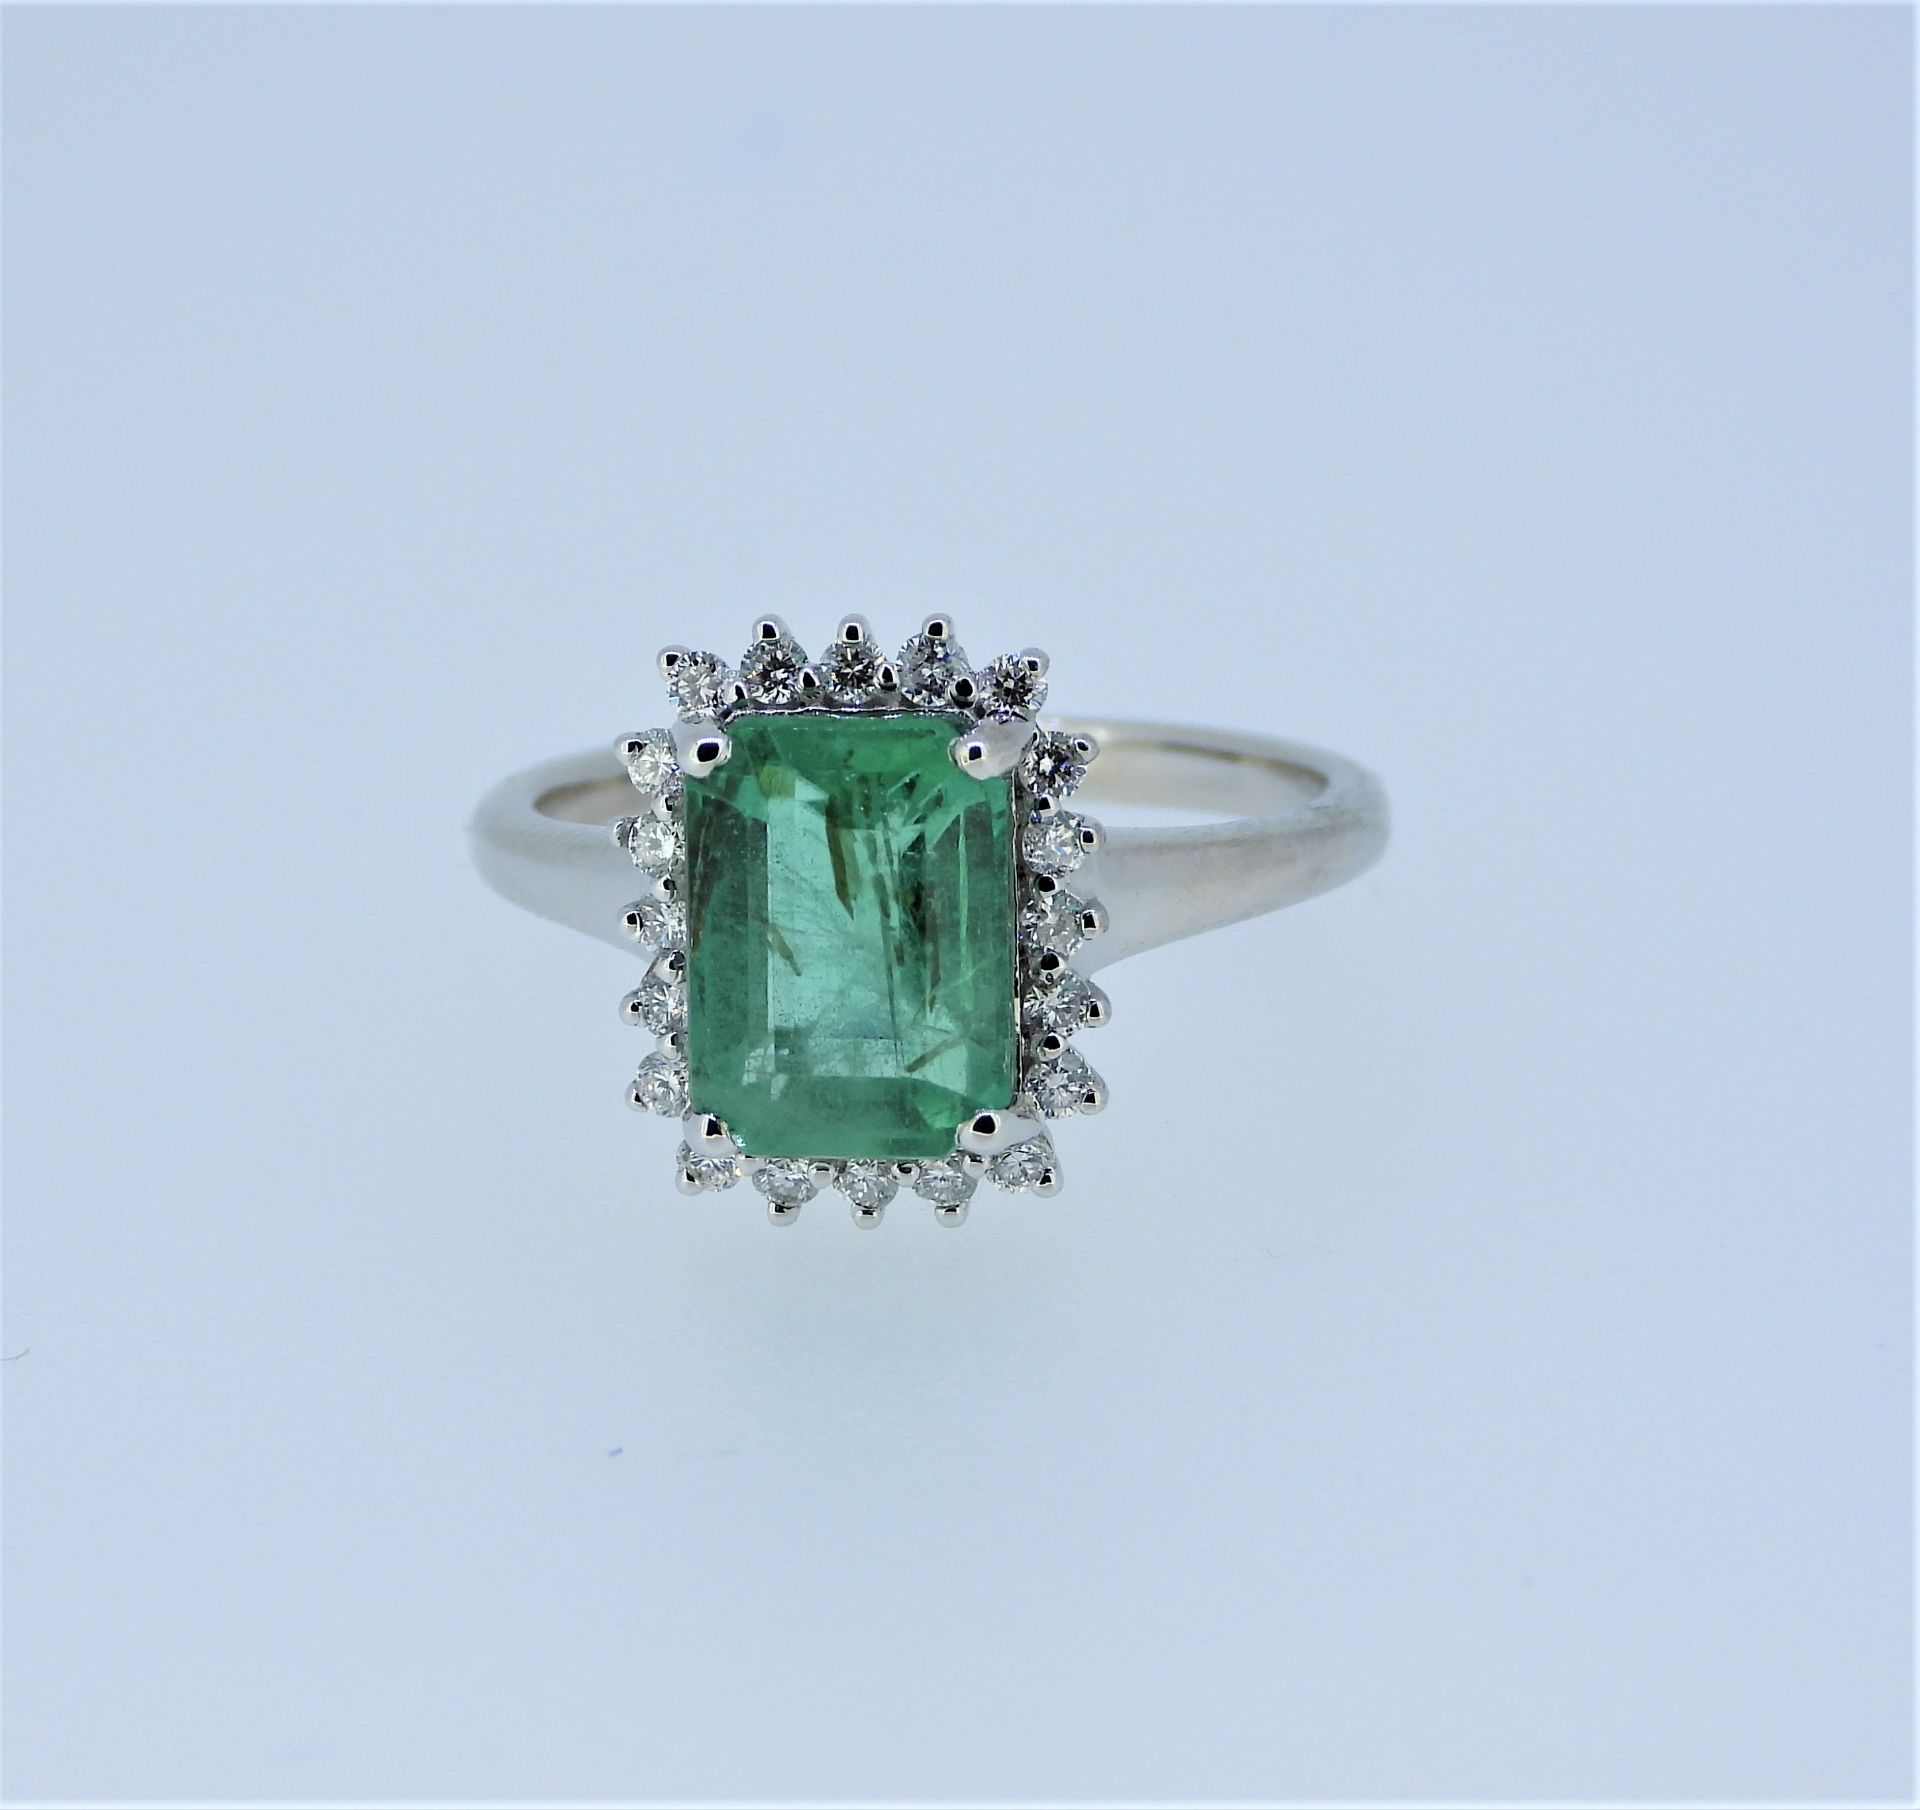 GIA Certified, 2.54-carat Natural Colombia Emerald and Diamonds 18k White Gold Ring.